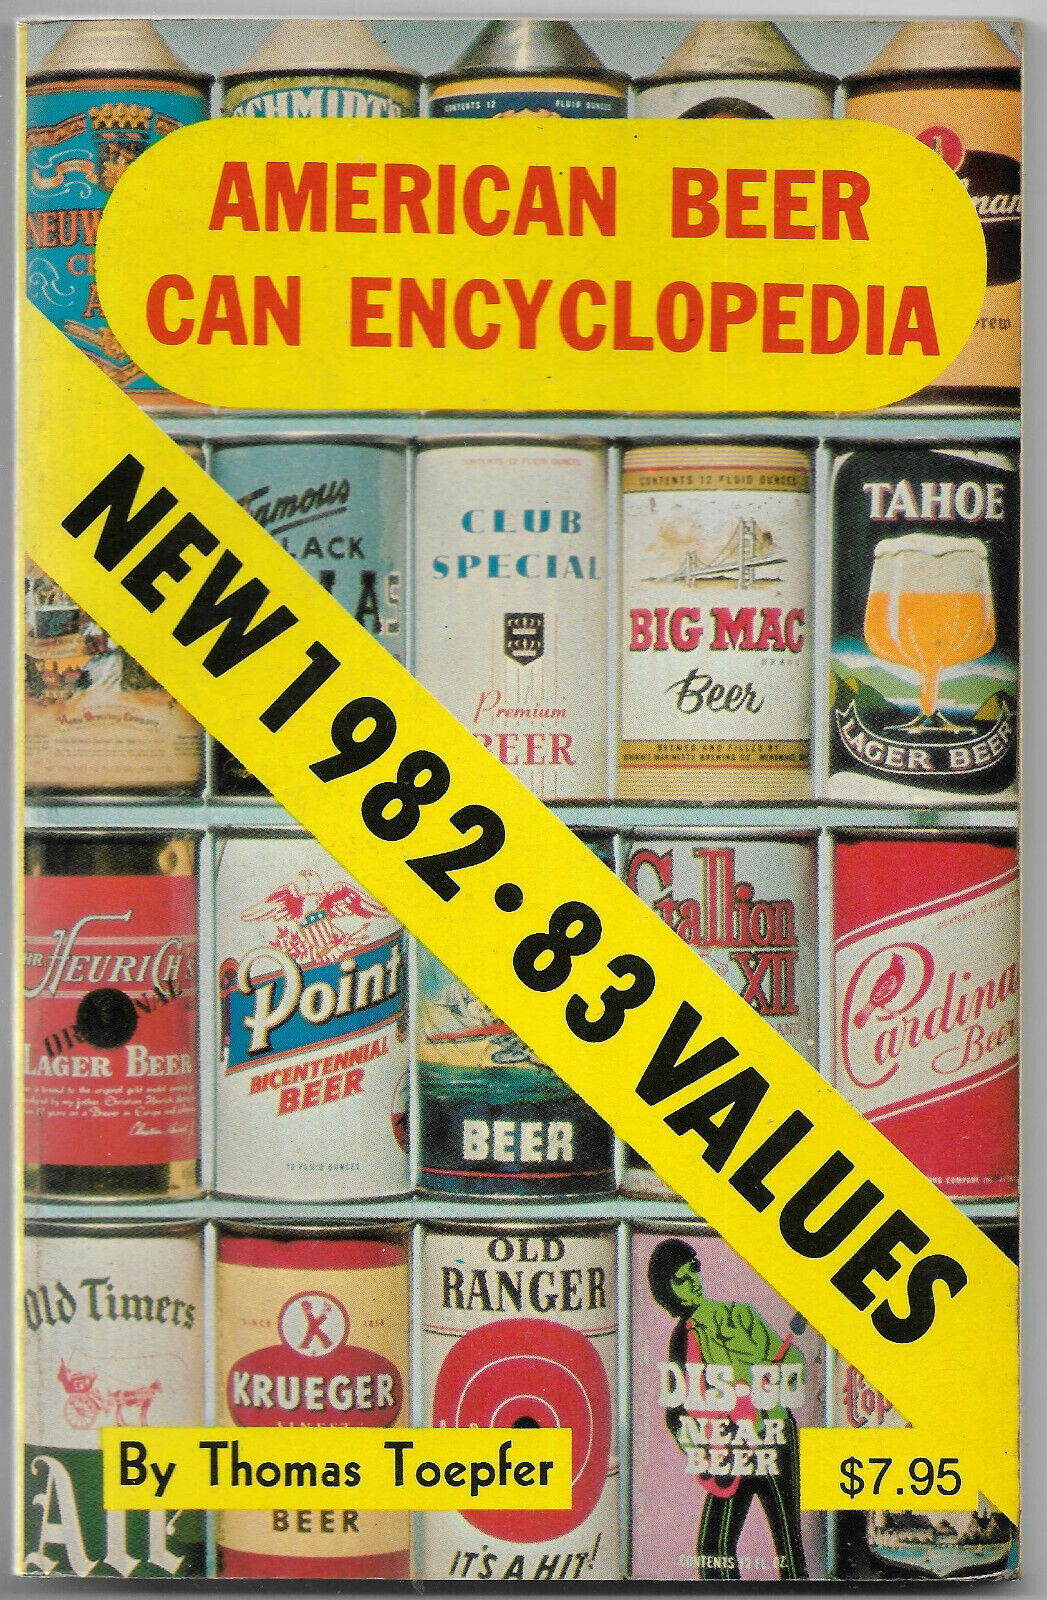 Primary image for American Beer Can Encyclopedia 1982-83 Edition by Thomas Toepfer Trade PB VG